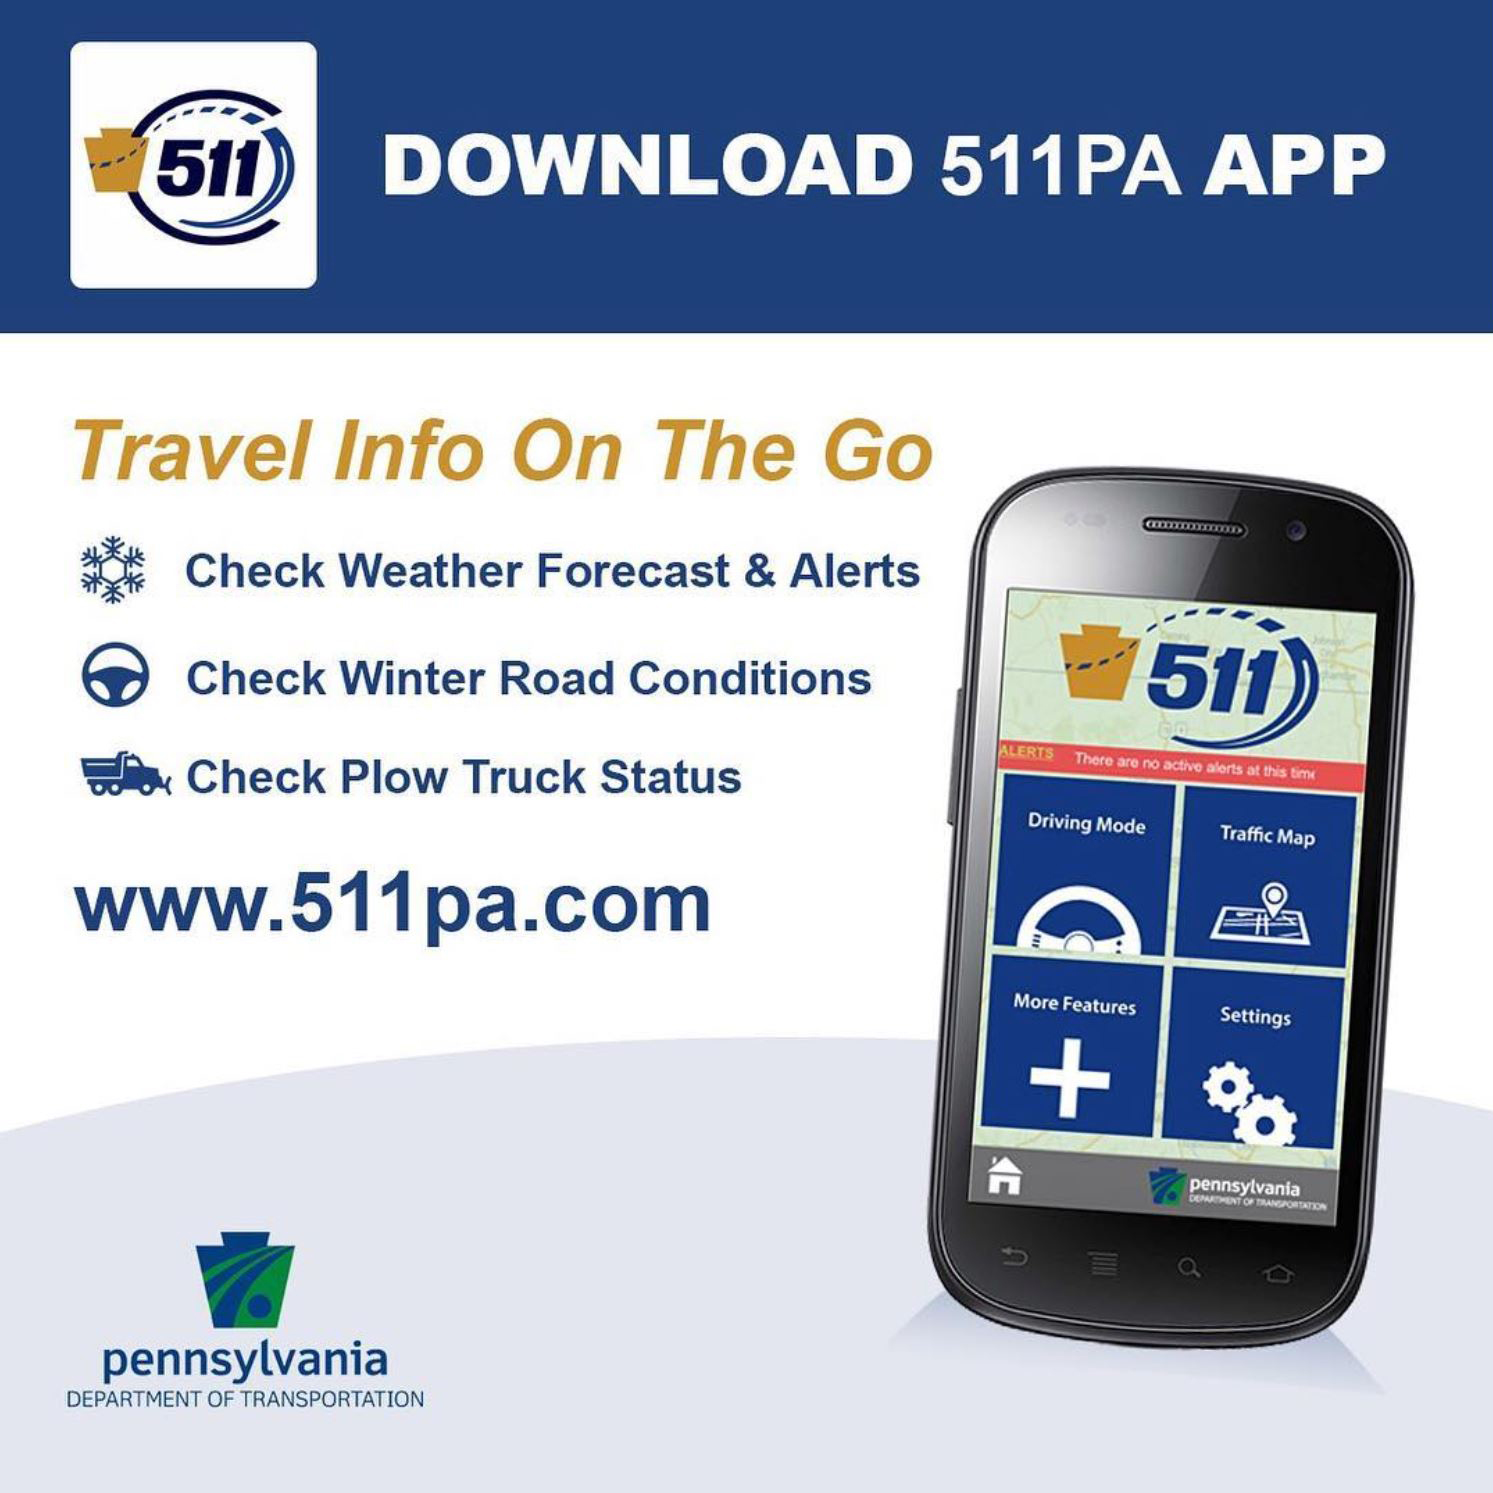 Infographic encourage users to download the 511PA smartphone app.